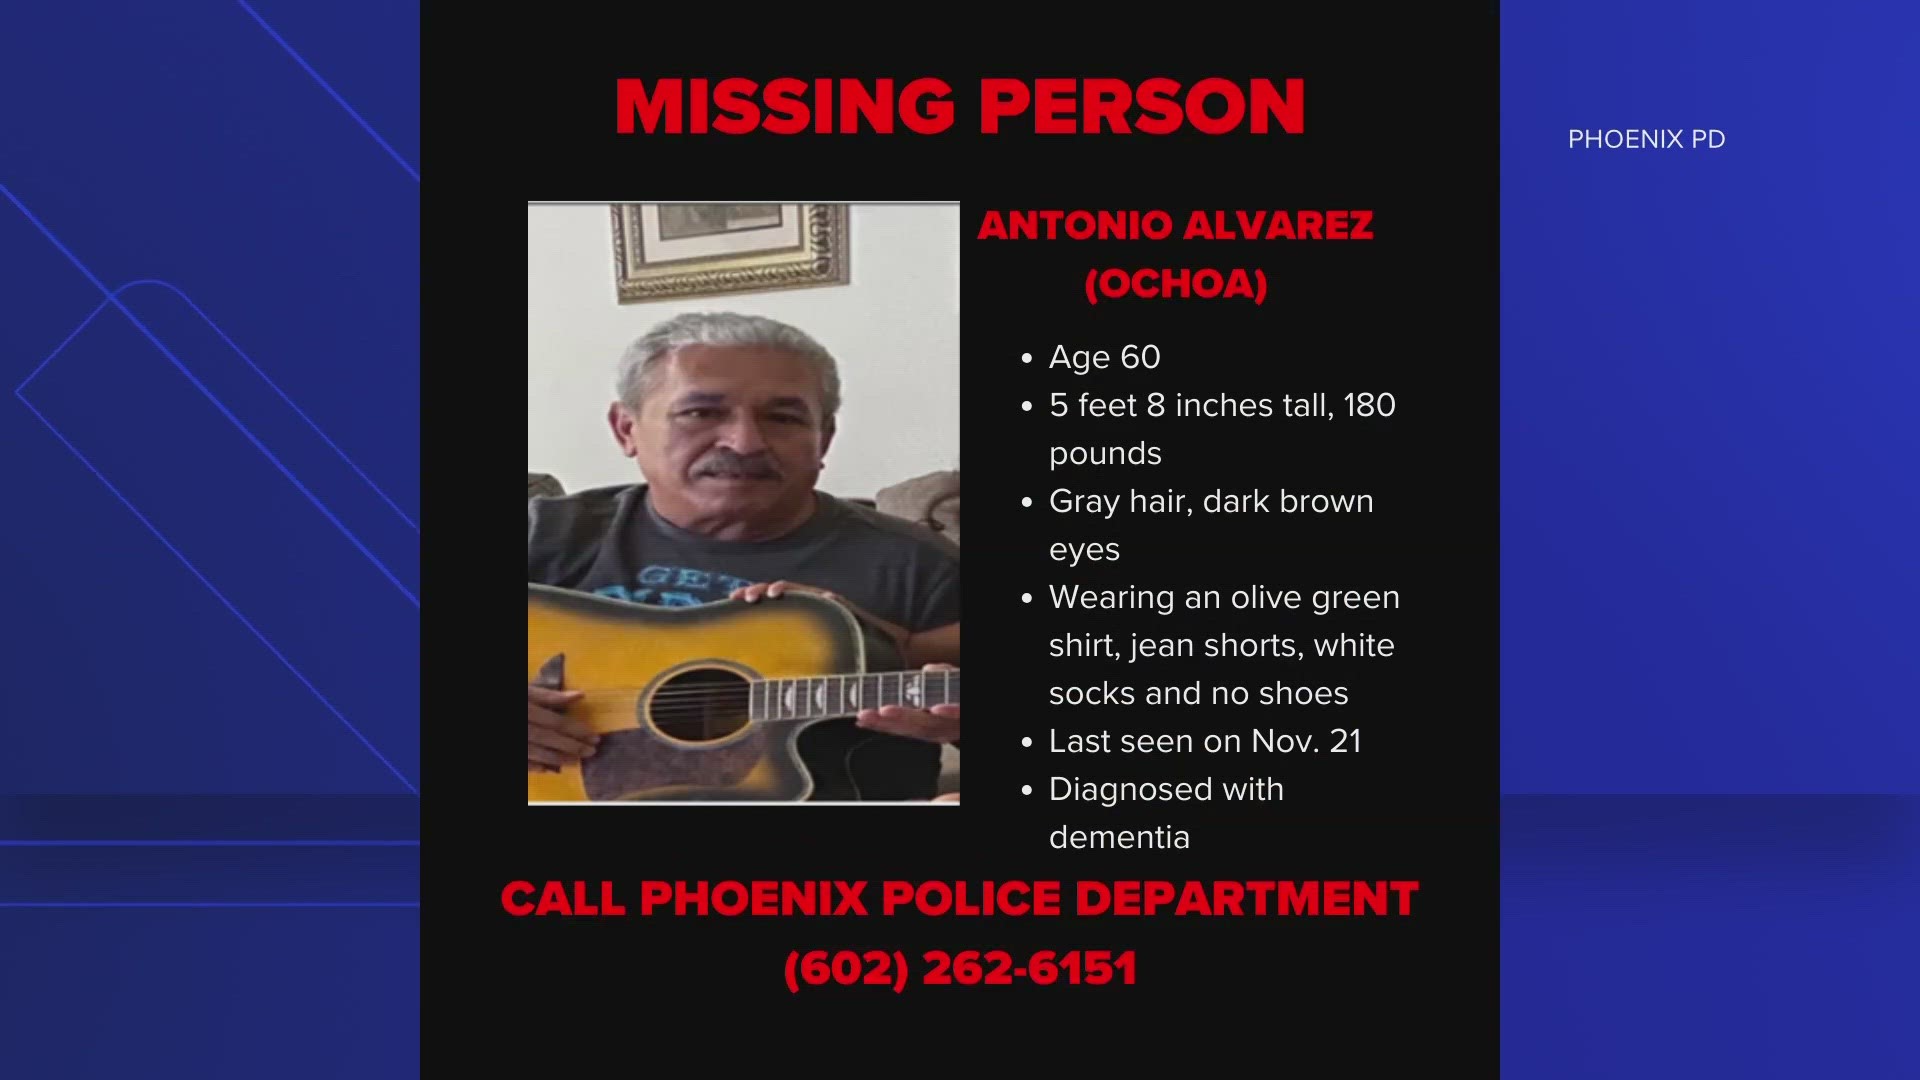 A Valley family is searching for Antonio Alvarez, a 60-year-old man with dementia, who is missing. Watch the video for the latest details.